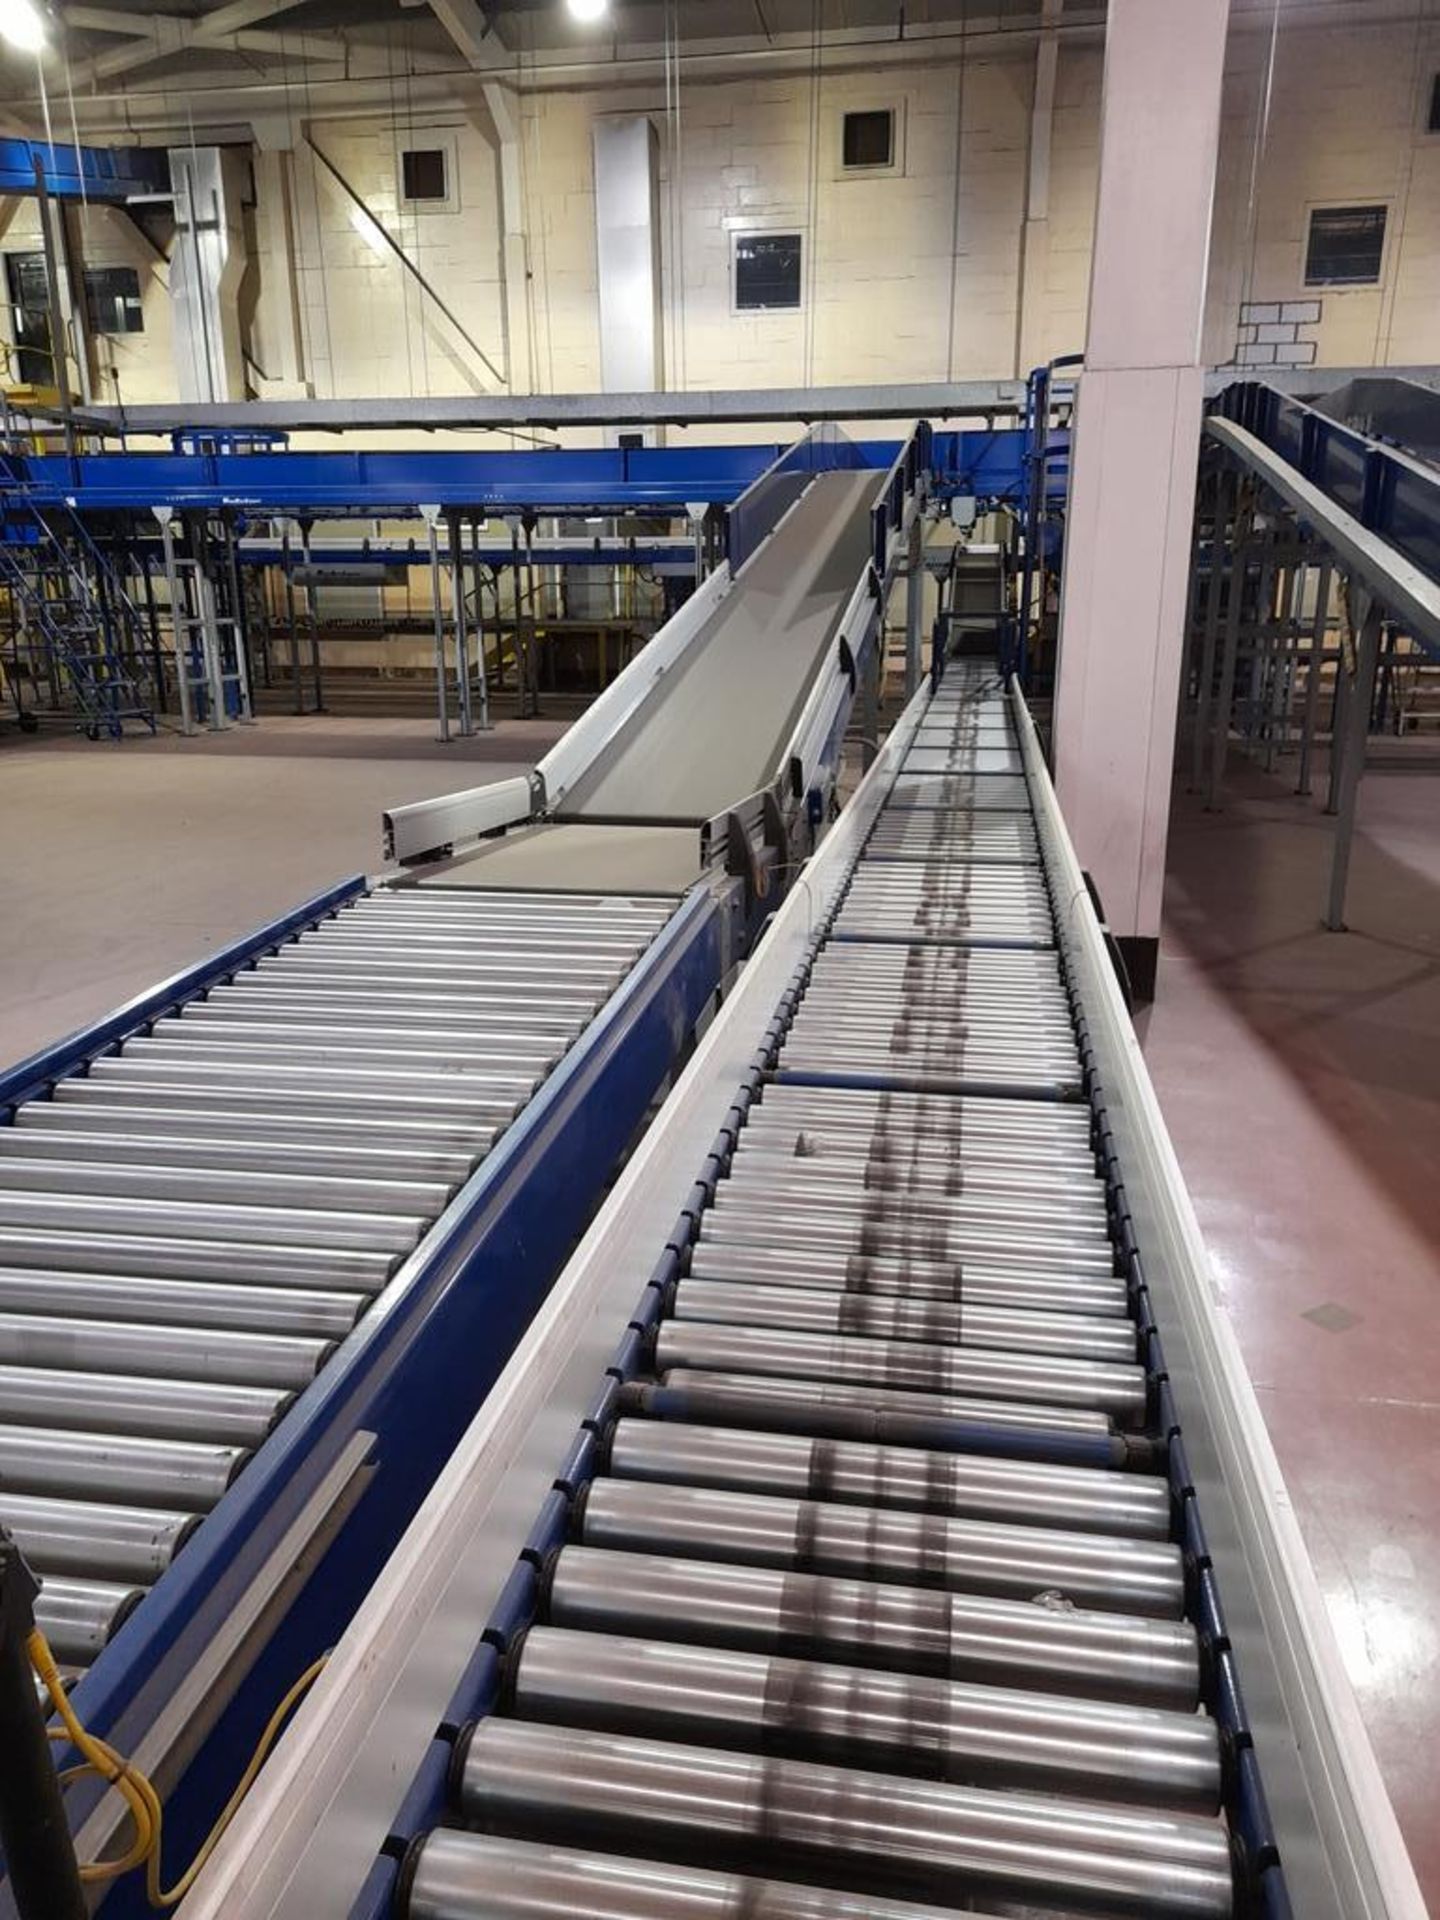 Unloading and data catchment: Line 3 - Approx 12 various conveyors, belt & roller, straight, angled, - Image 16 of 16